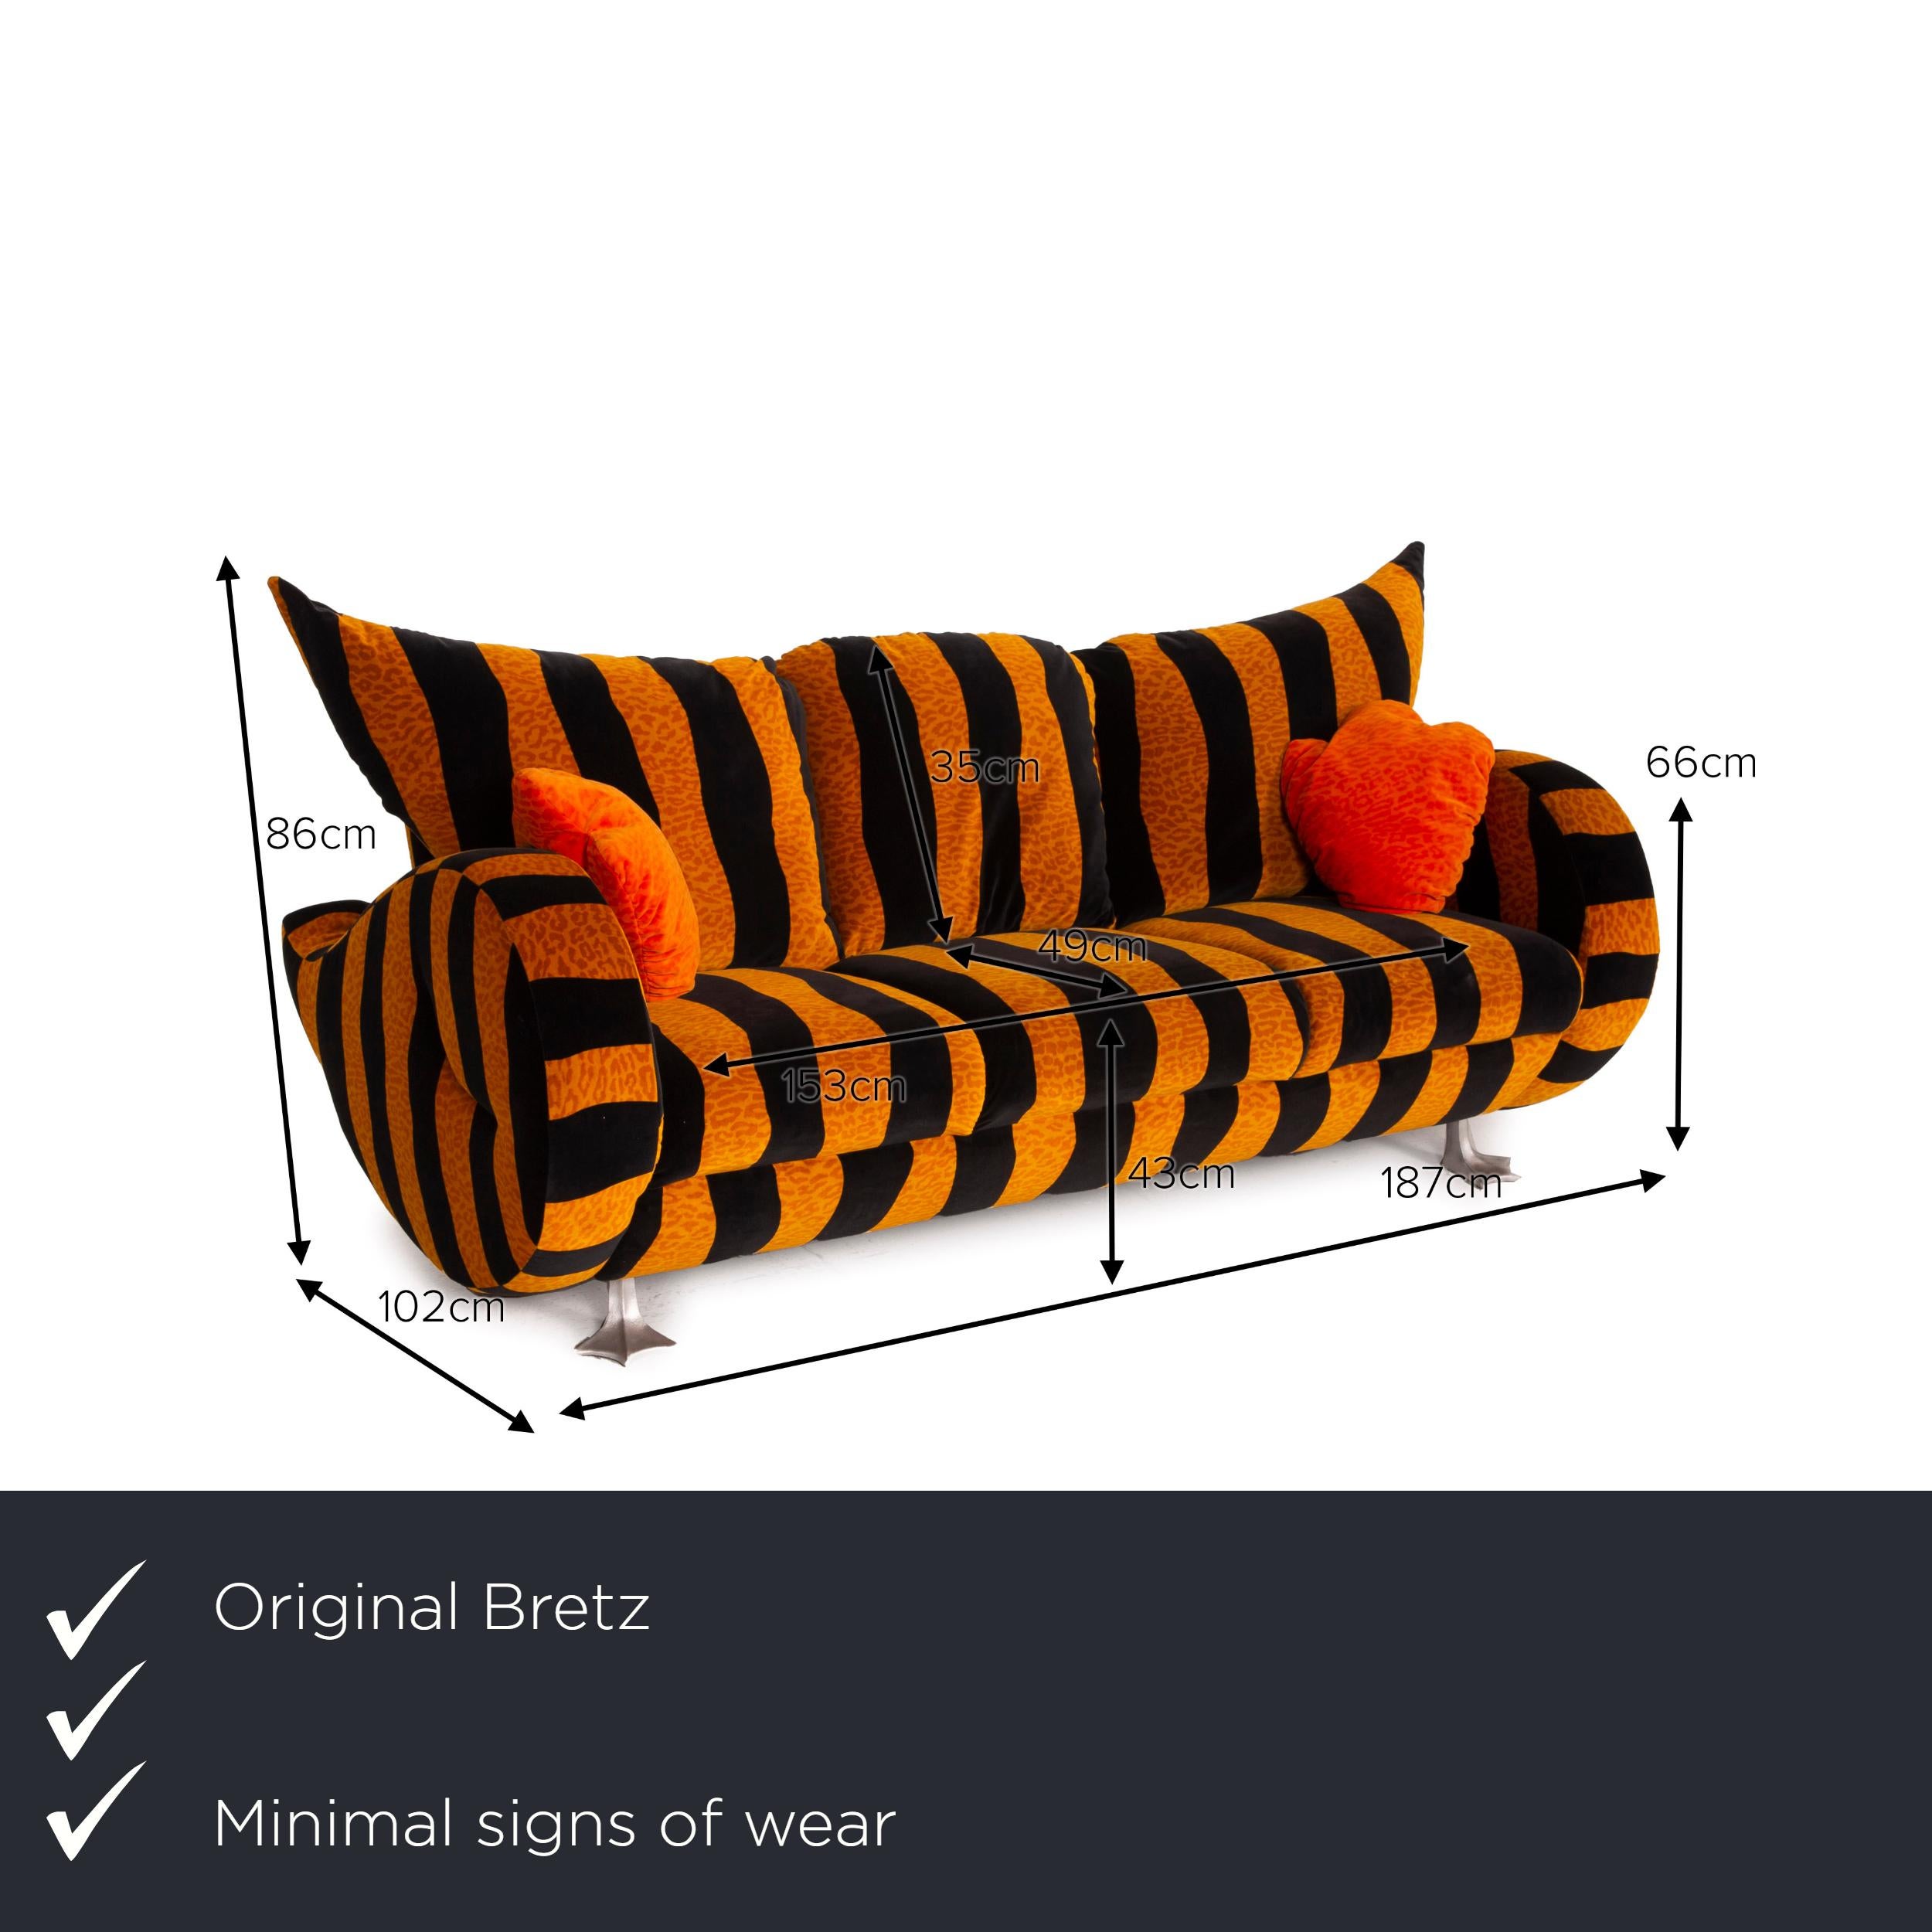 We present to you a Bretz prison duck fabric sofa yellow three-seater black tiger pattern.

Product measurements in centimeters:

Depth 102
Width 187
Height 86
Seat height 43
Rest height 66
Seat depth 49
Seat width 153
Back height